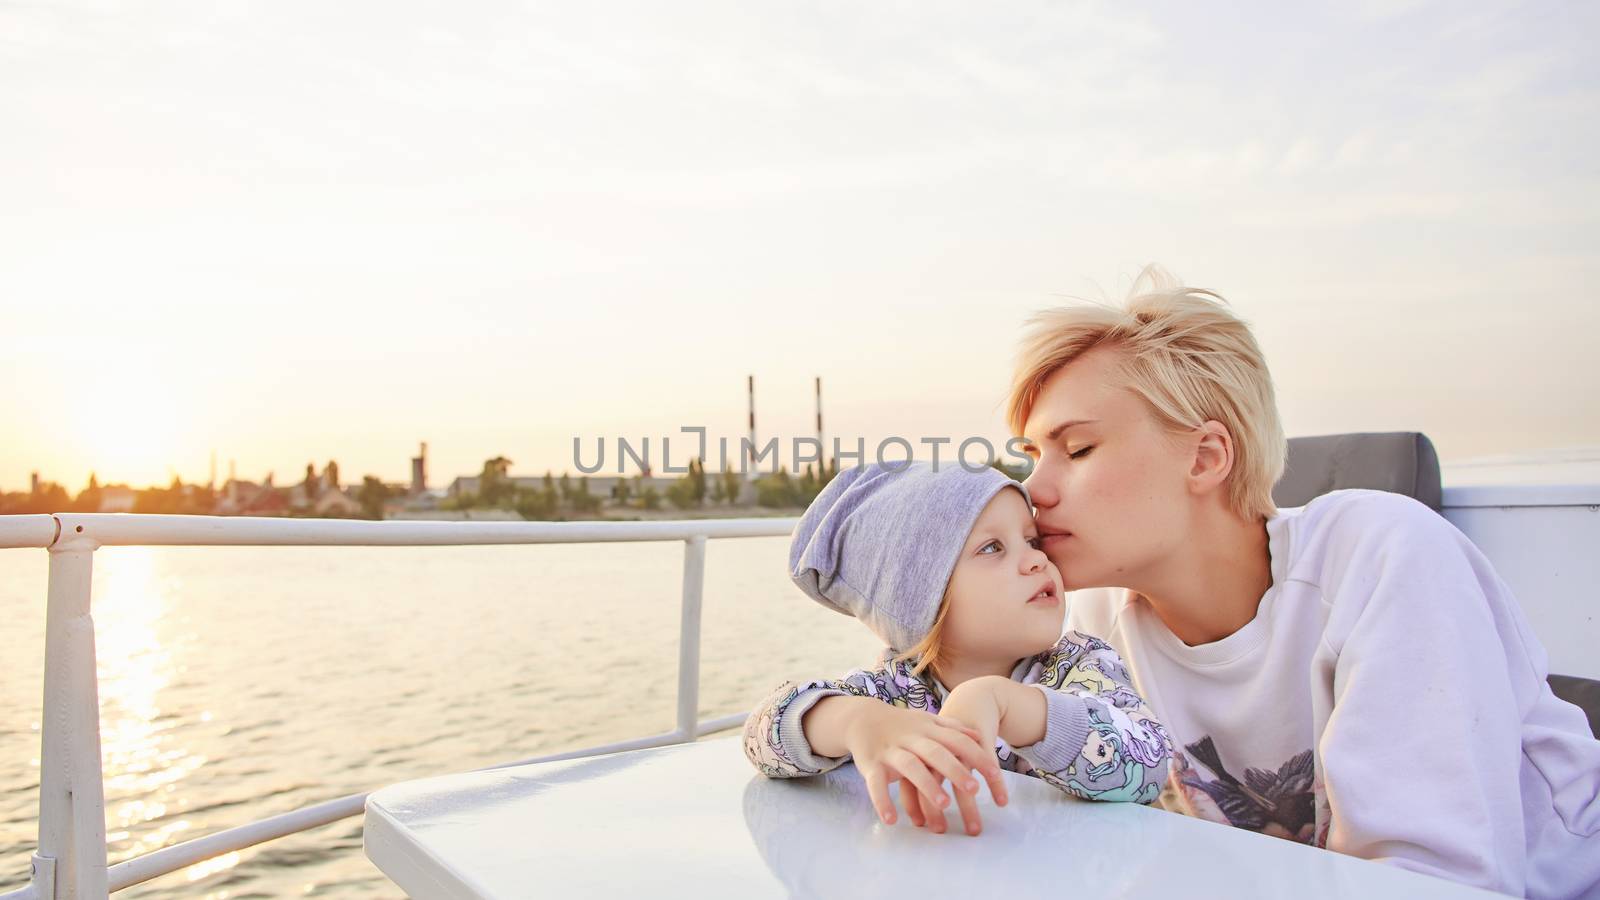 Mother, daughter on yacht or catamaran boat.  Concept of the family